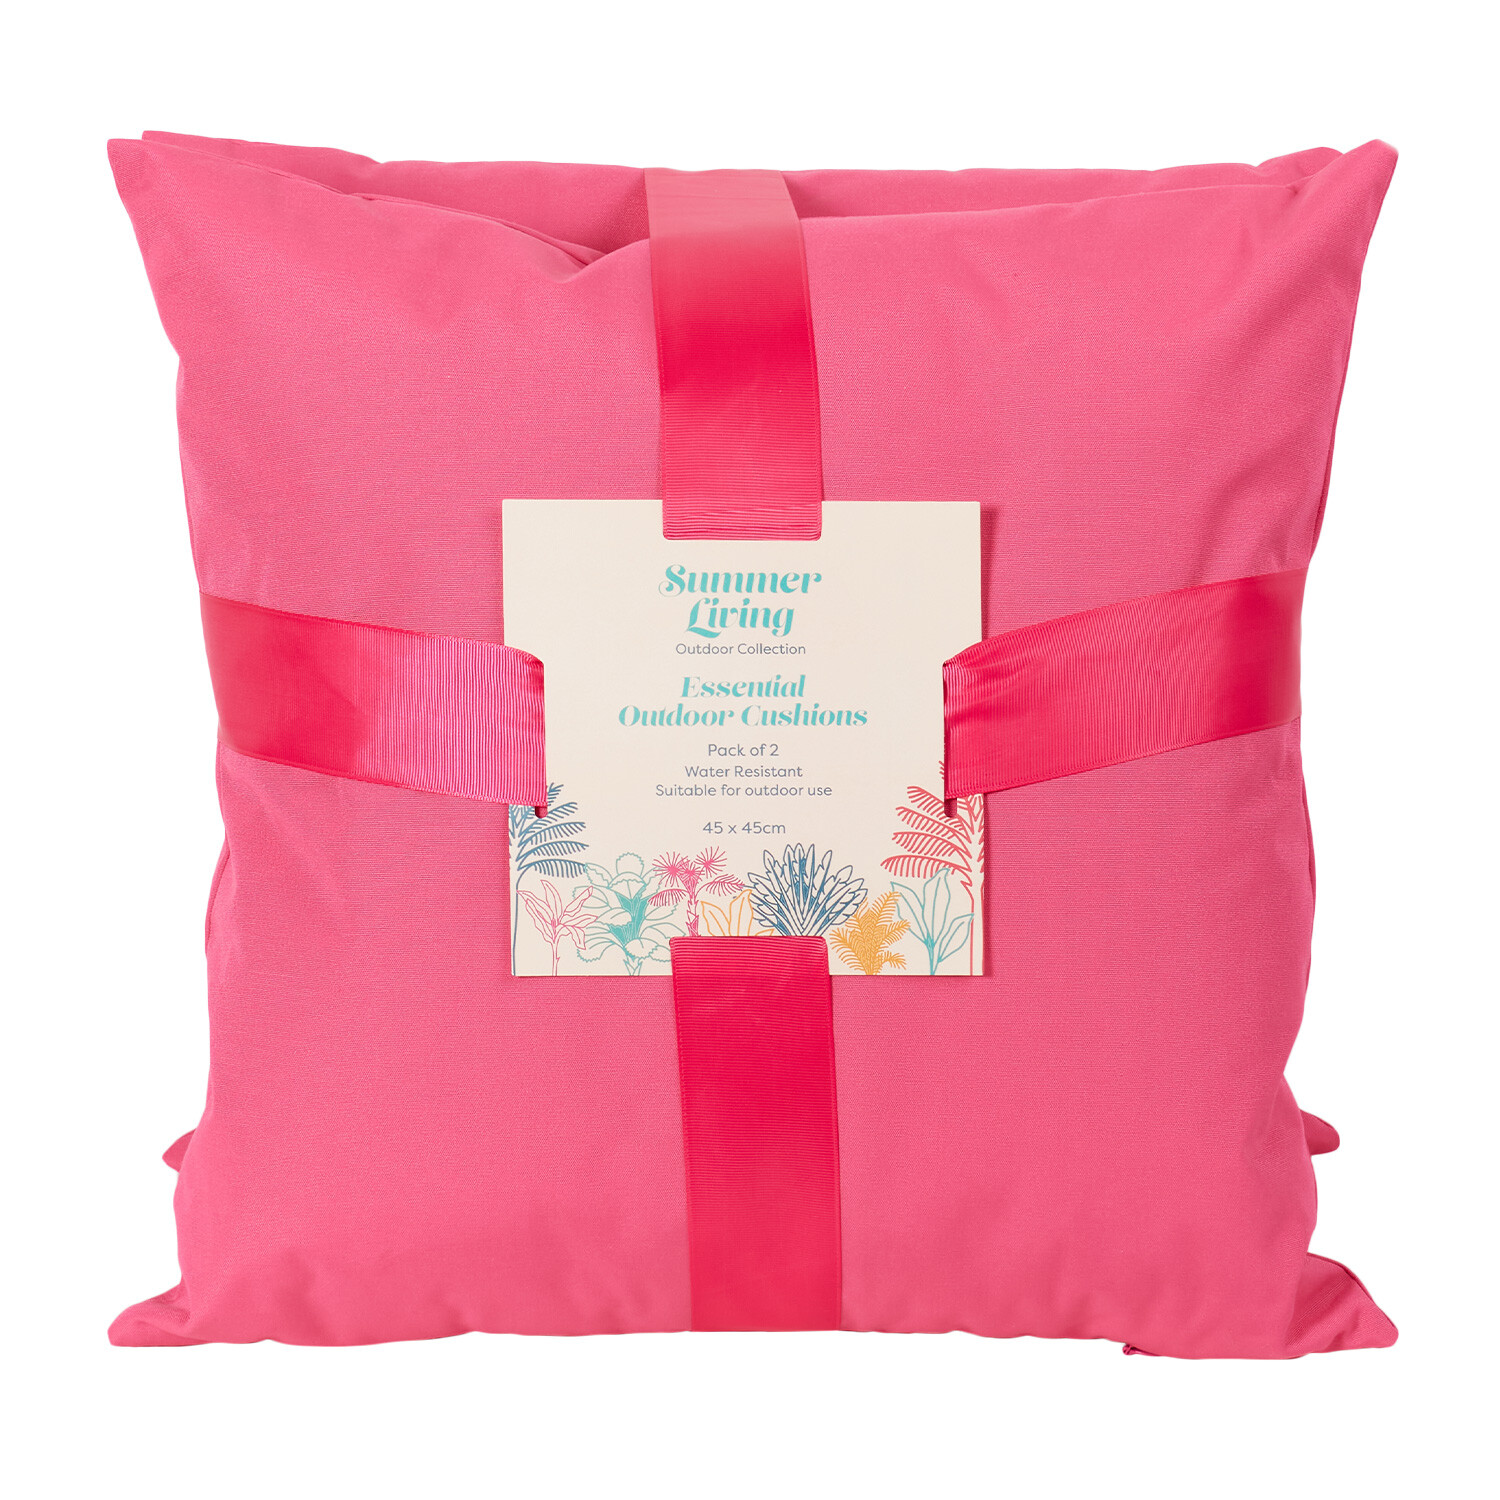 Essential Outdoor Cushions - Pink Image 1